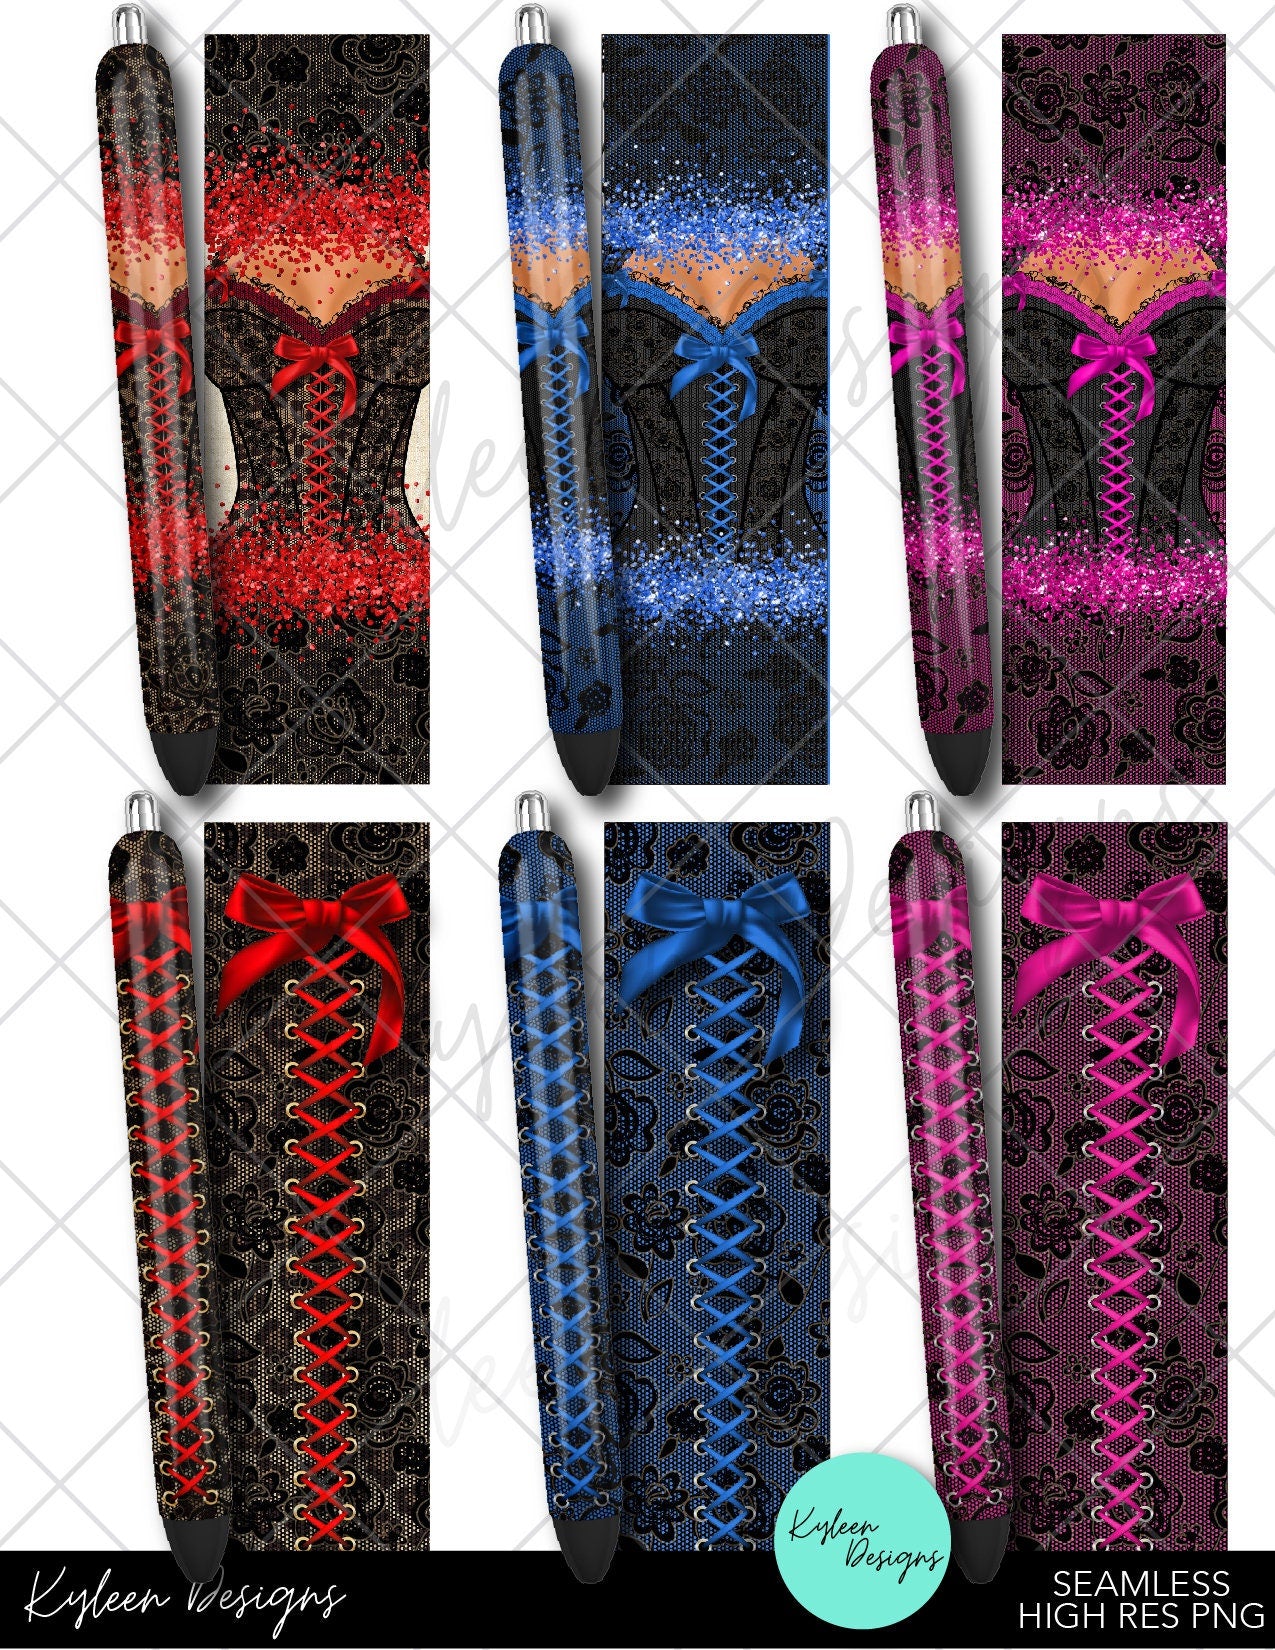 Lace Corset pen wraps for waterslide high RES PNG